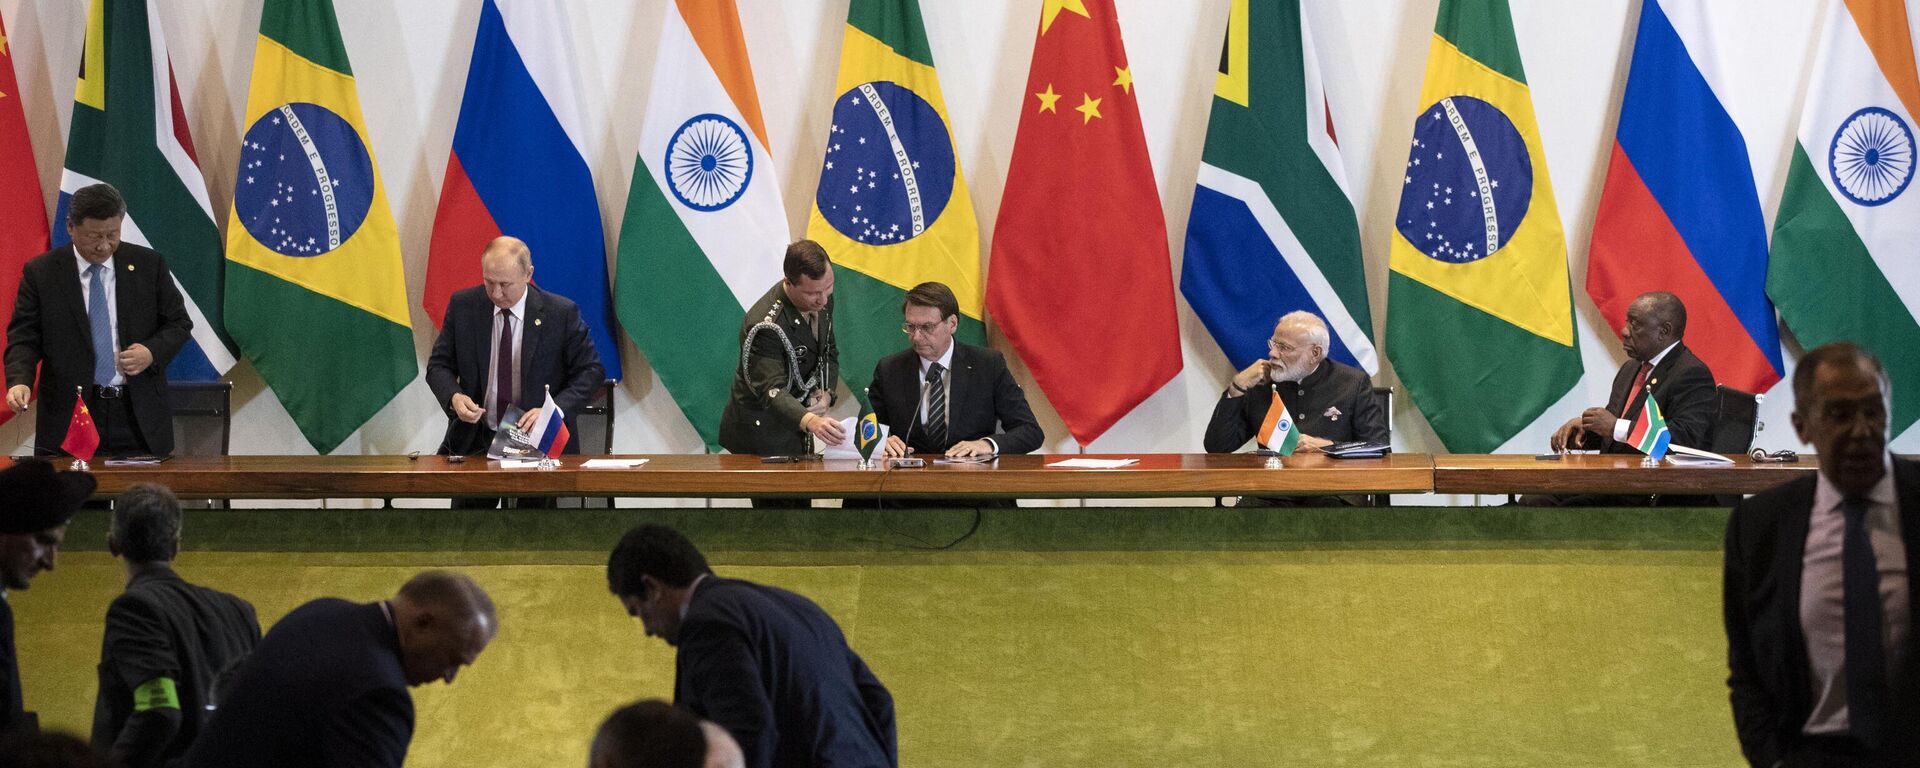 China's President Xi Jinping (L), Russia's President Vladimir Putin (2nd L), Brazil's President Jair Bolsonaro (C), India's Prime Minister Narendra Modi (2nd R), and South Africa's President Cyril Ramaphosa (R) attend to a meeting with members of the Business Council and management of the New Development Bank during the BRICS Summit in Brasilia, November 14, 2019 - Sputnik International, 1920, 17.06.2023